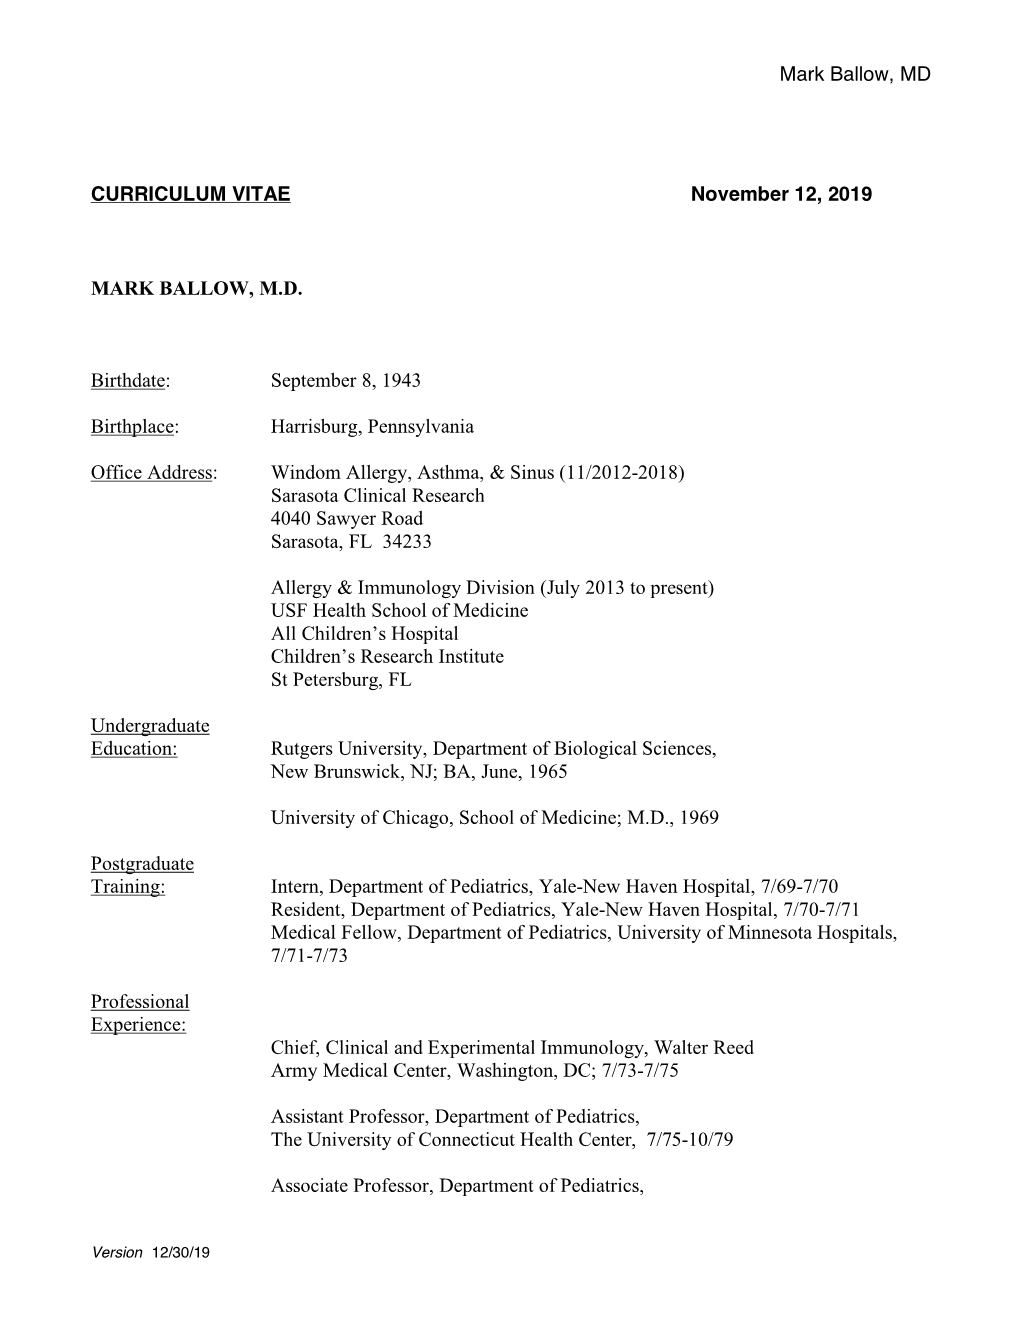 Blood Products Advisory Committee Curriculum Vitae Mark Ballow